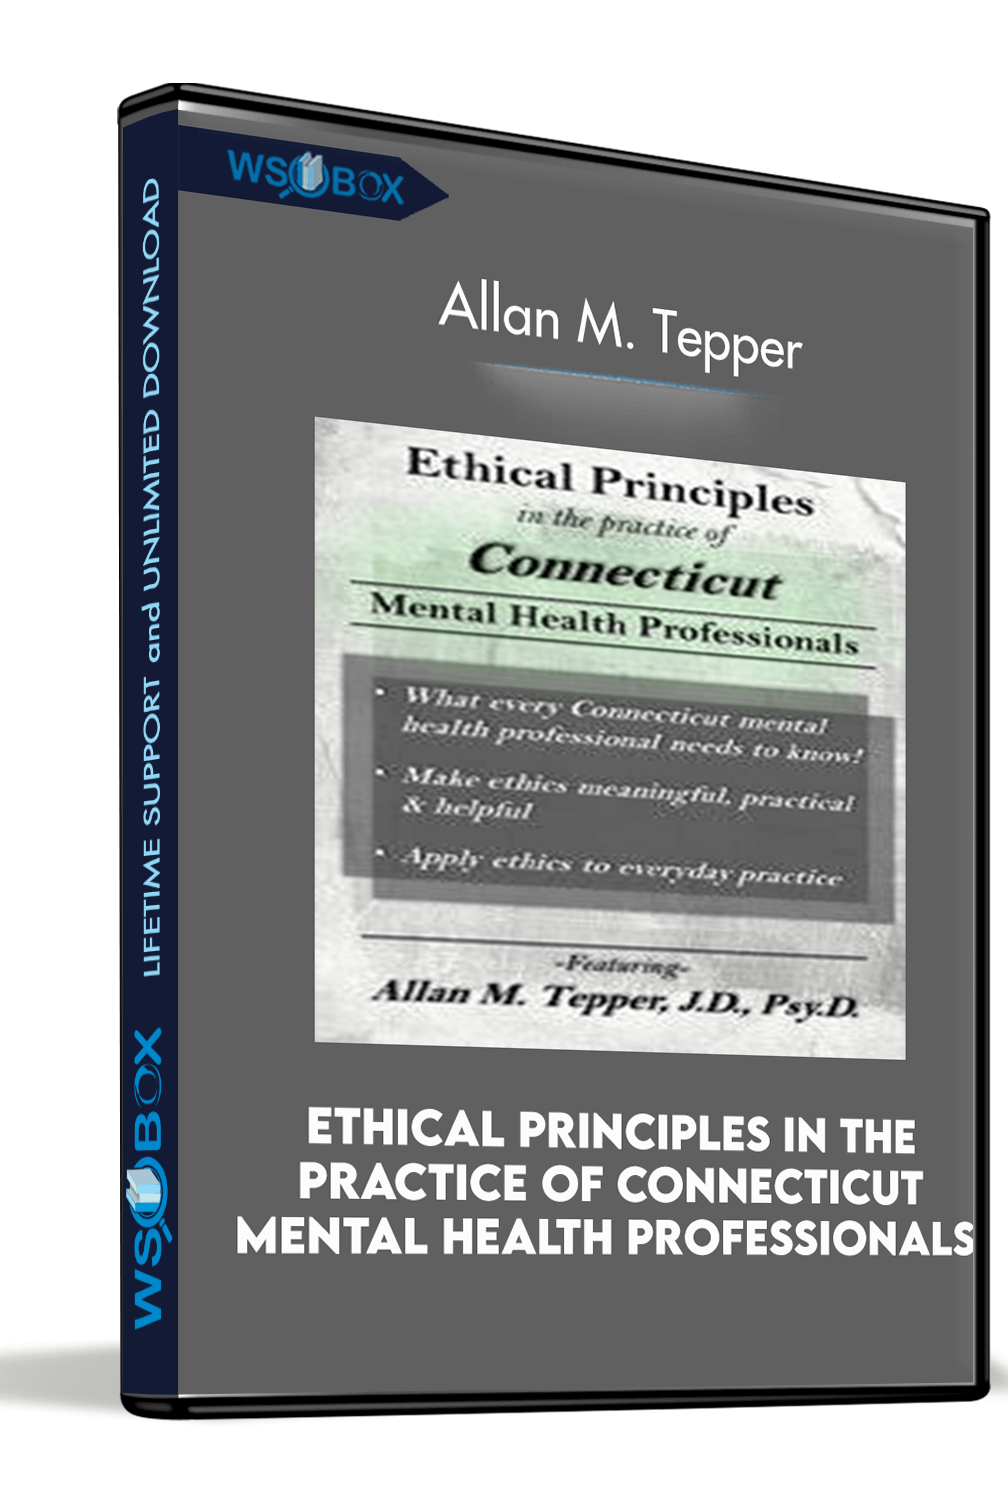 Ethical Principles in the Practice of Connecticut Mental Health Professionals – Allan M. Tepper